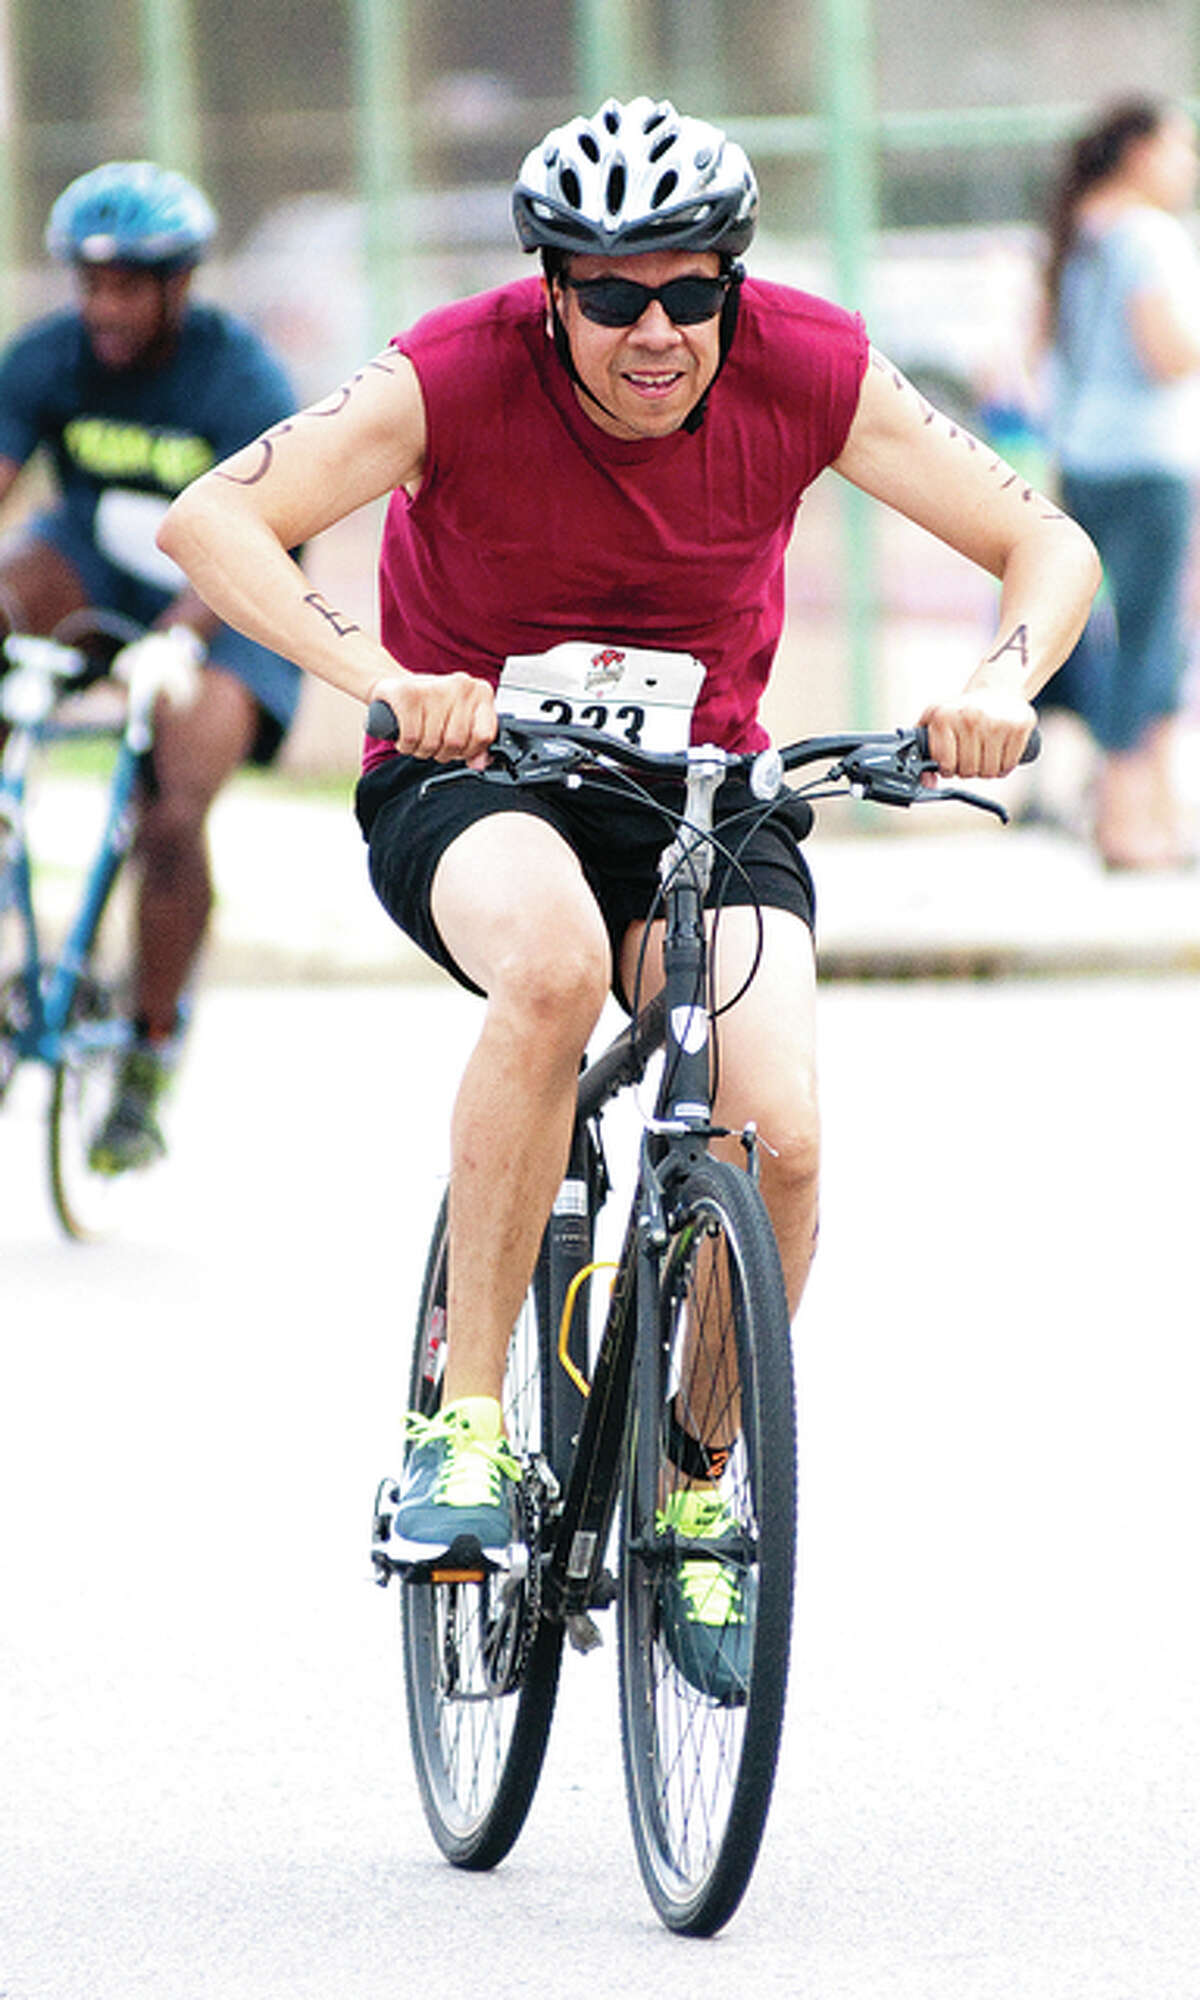 The triathletes also had to bike for 12 miles, traversing a two-mile radius on neighboring streets of the Wood River Aquatic Center.